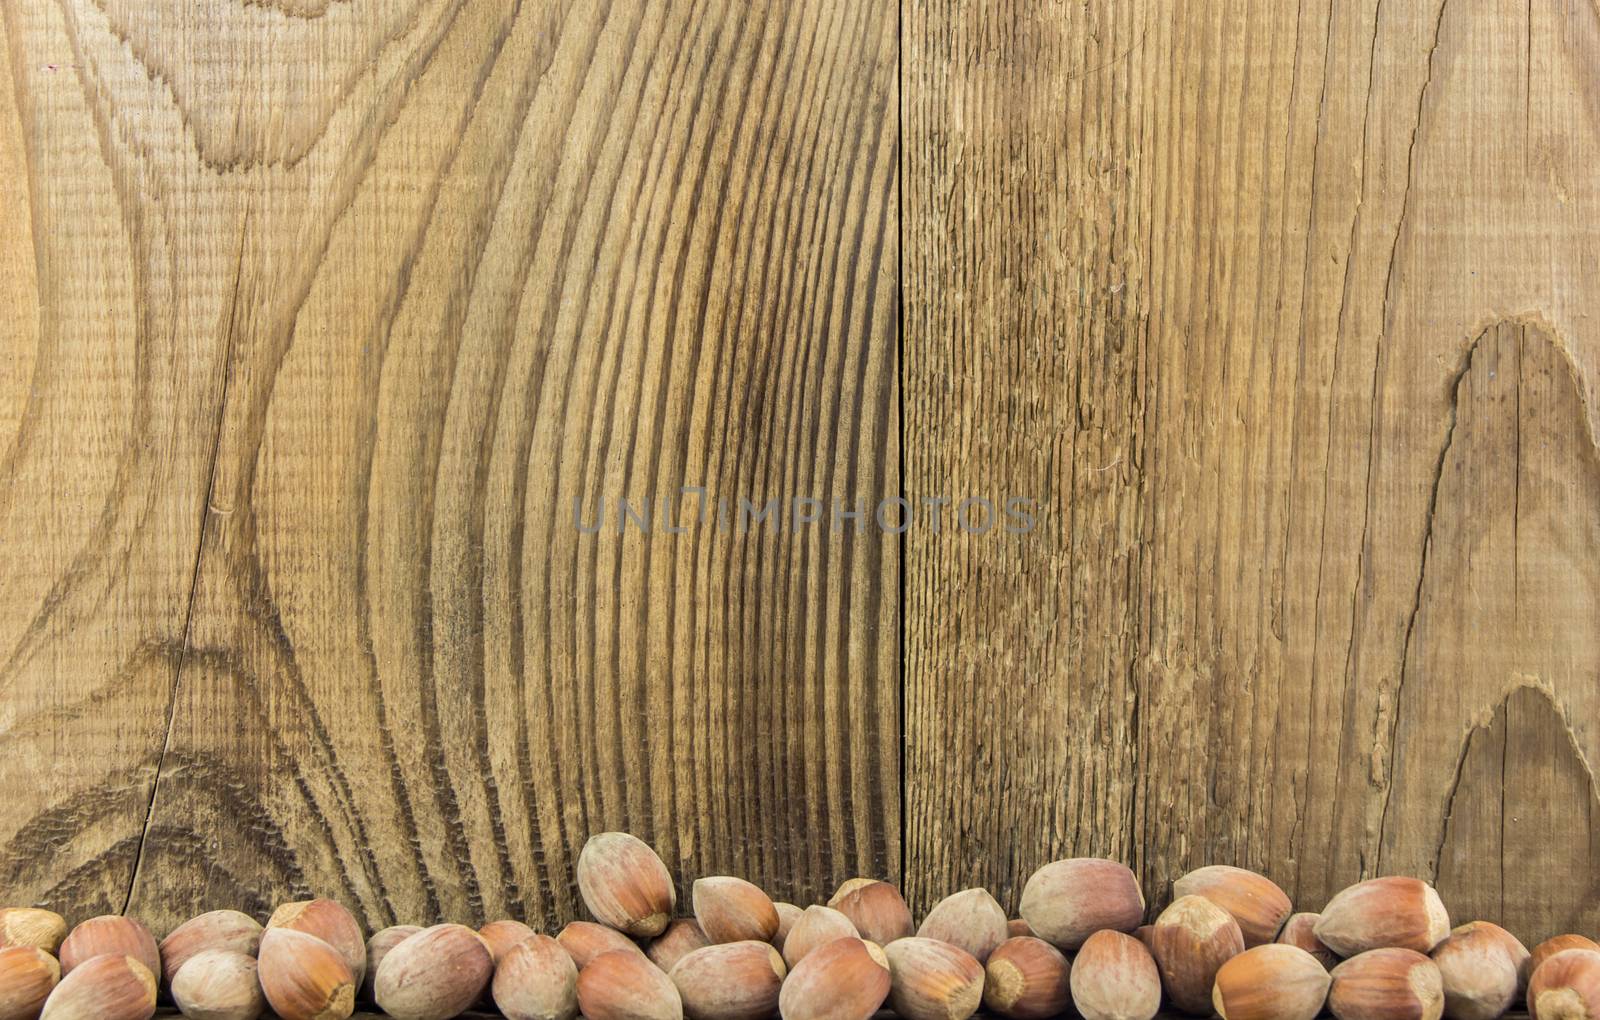 Filberts on a wooden table. Close-up shot. by serhii_lohvyniuk